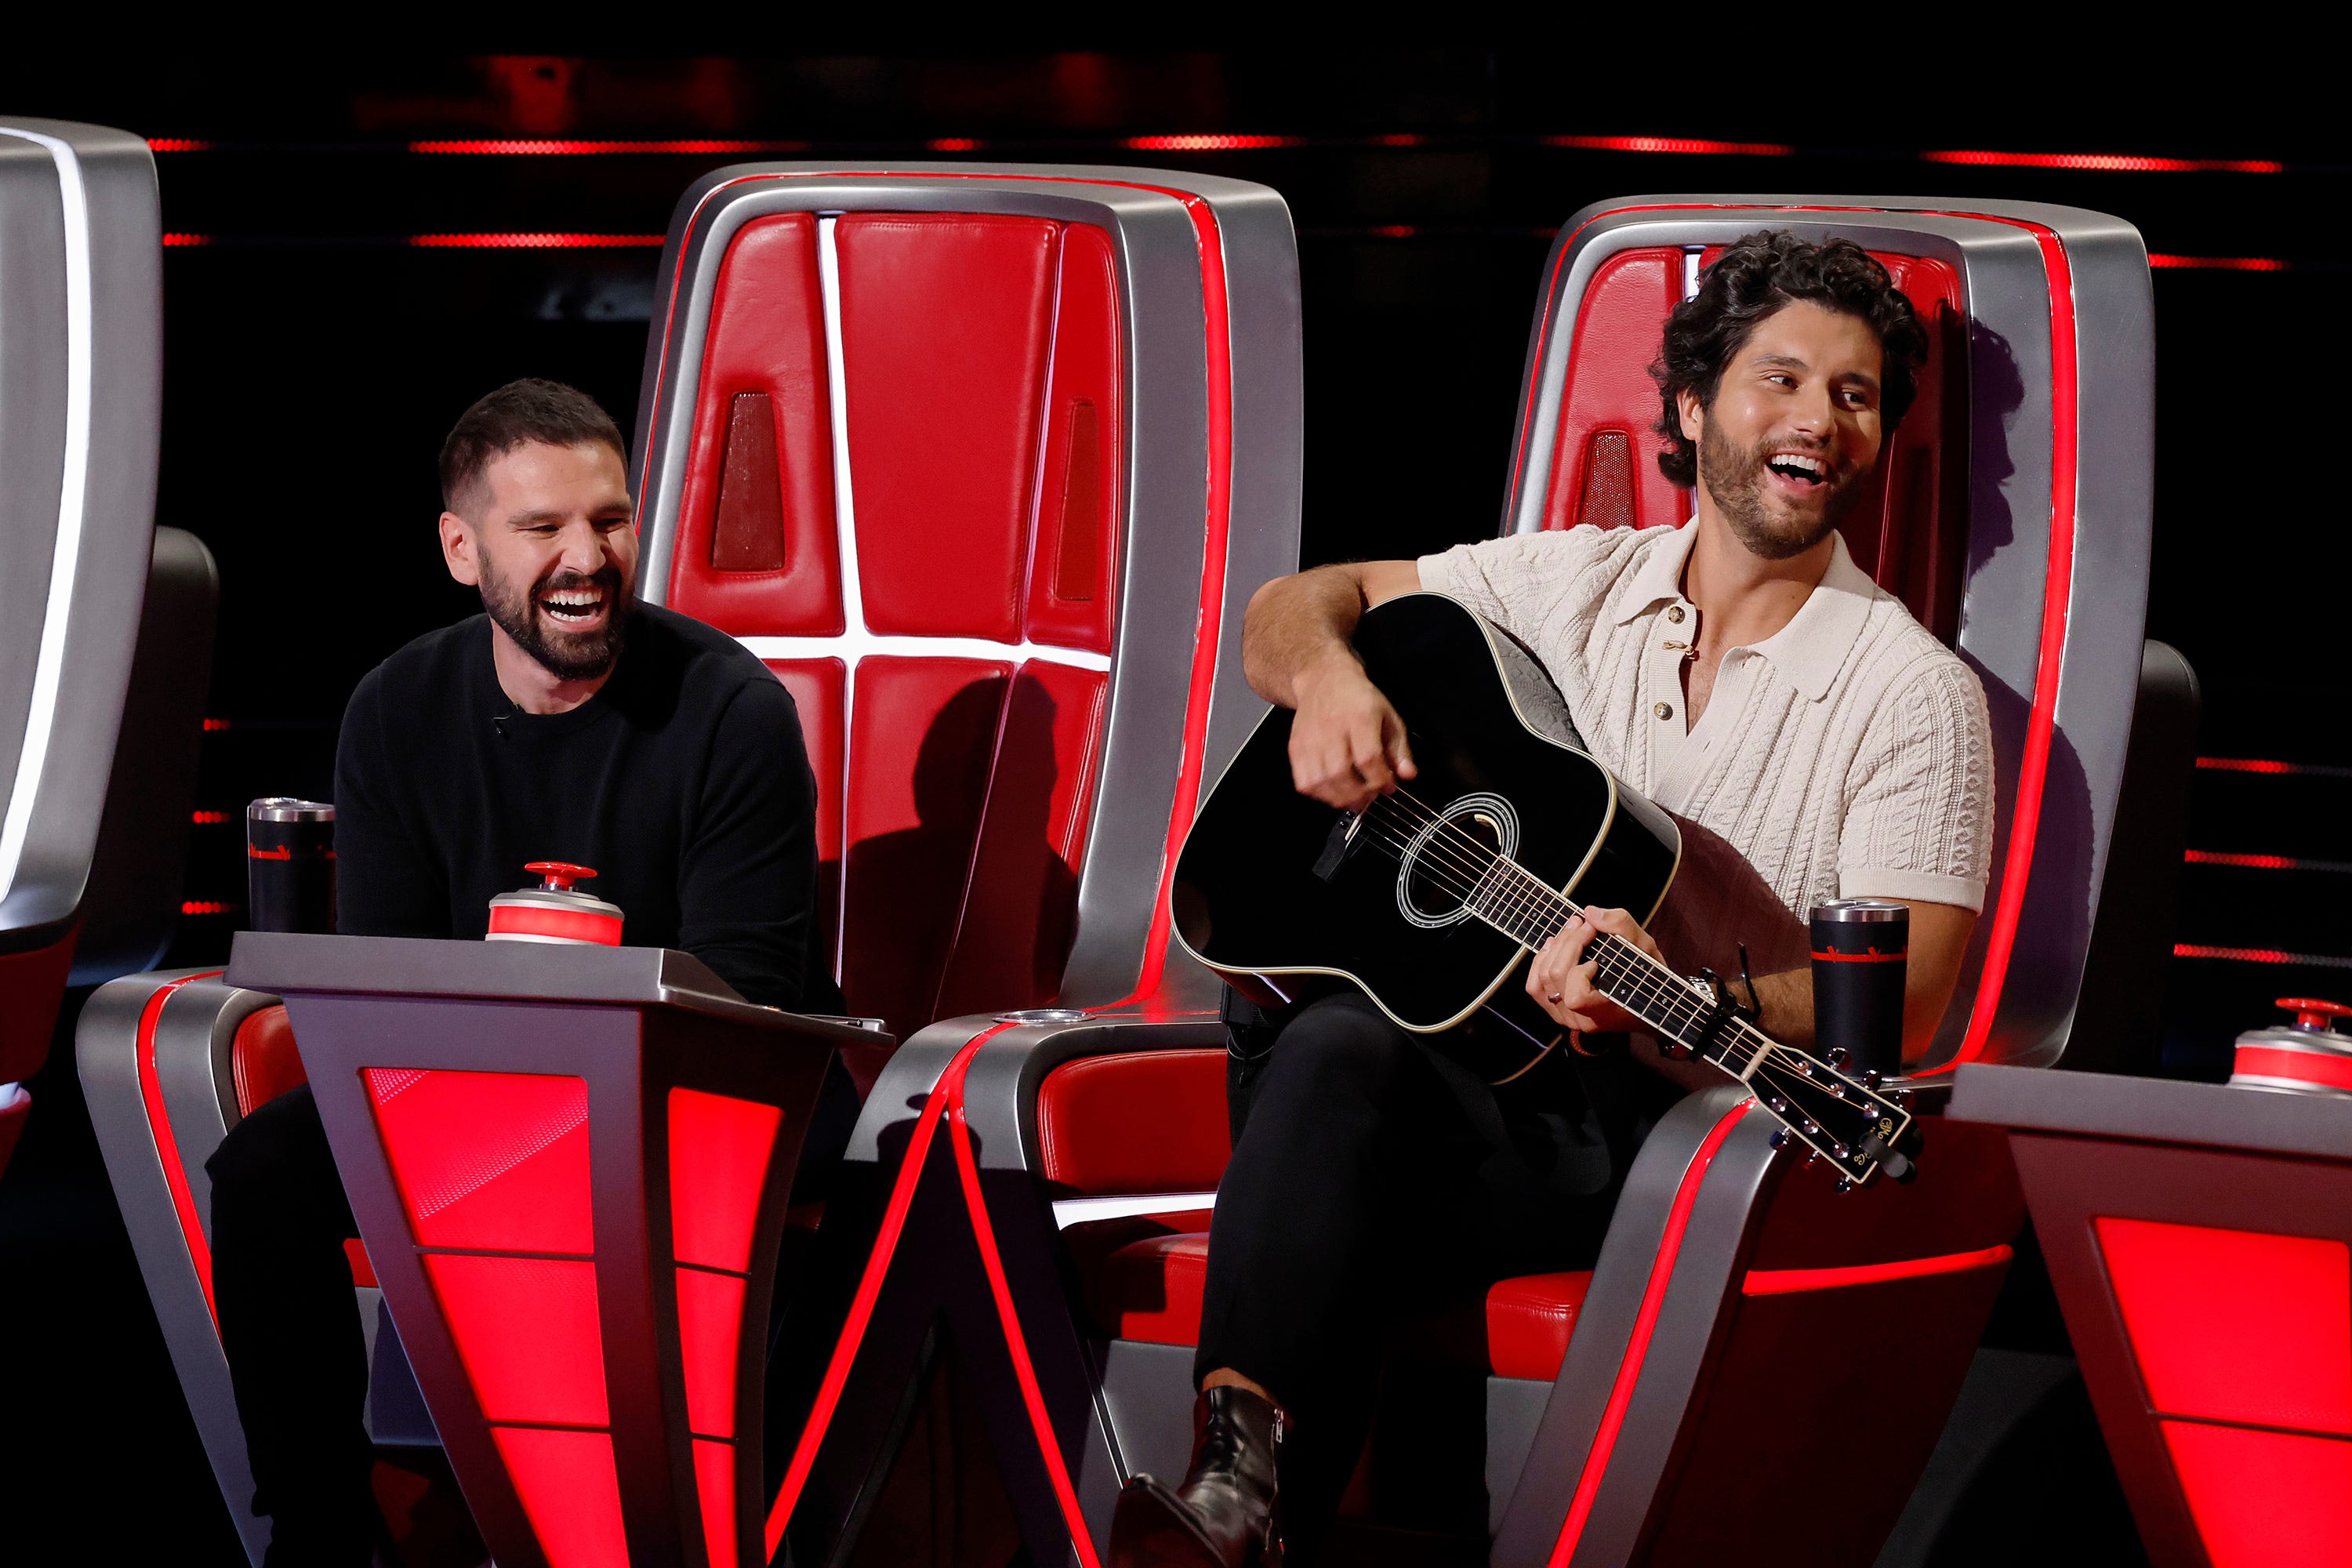 'Voice' Coaches Dan + Shay Took the Stage During Blind Auditions for the Sweetest Reason